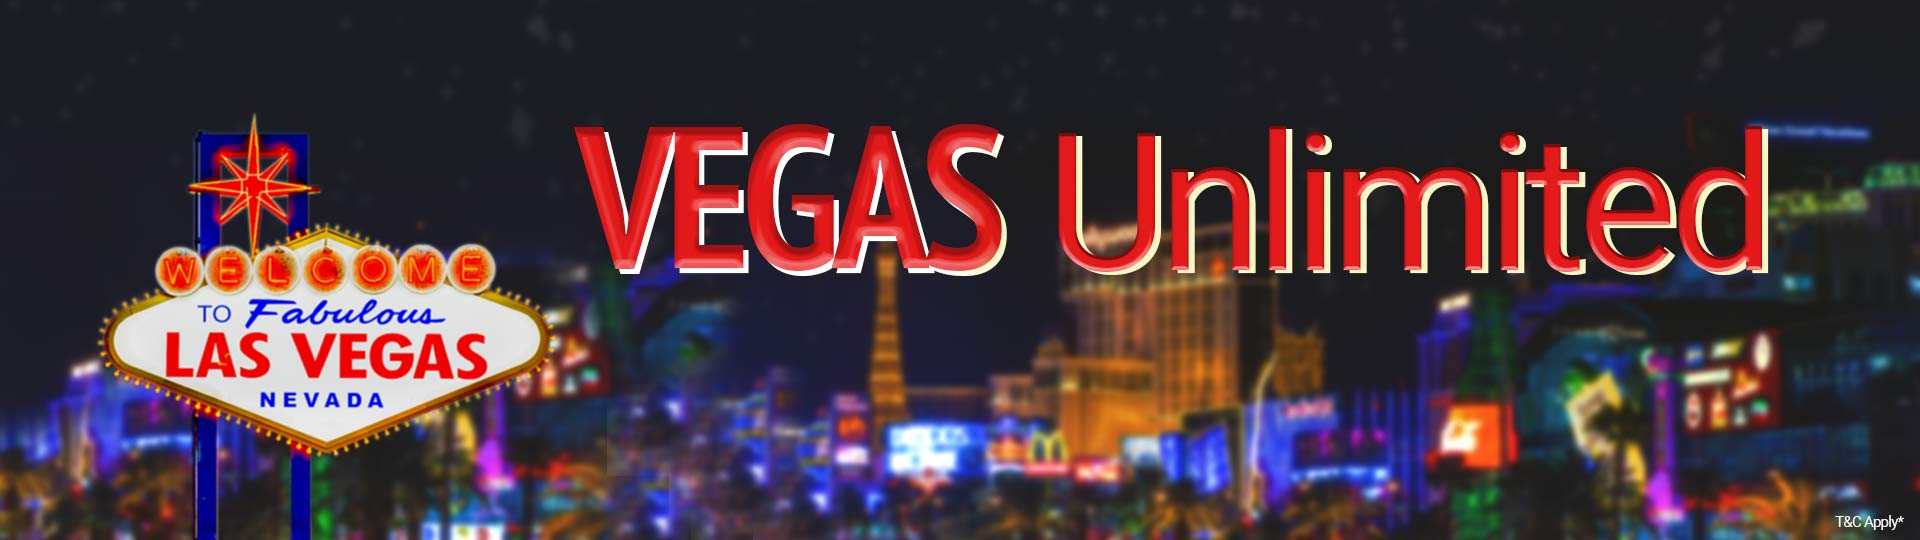 Adda52 Vegas Unlimited | Play and Win Vegas Package